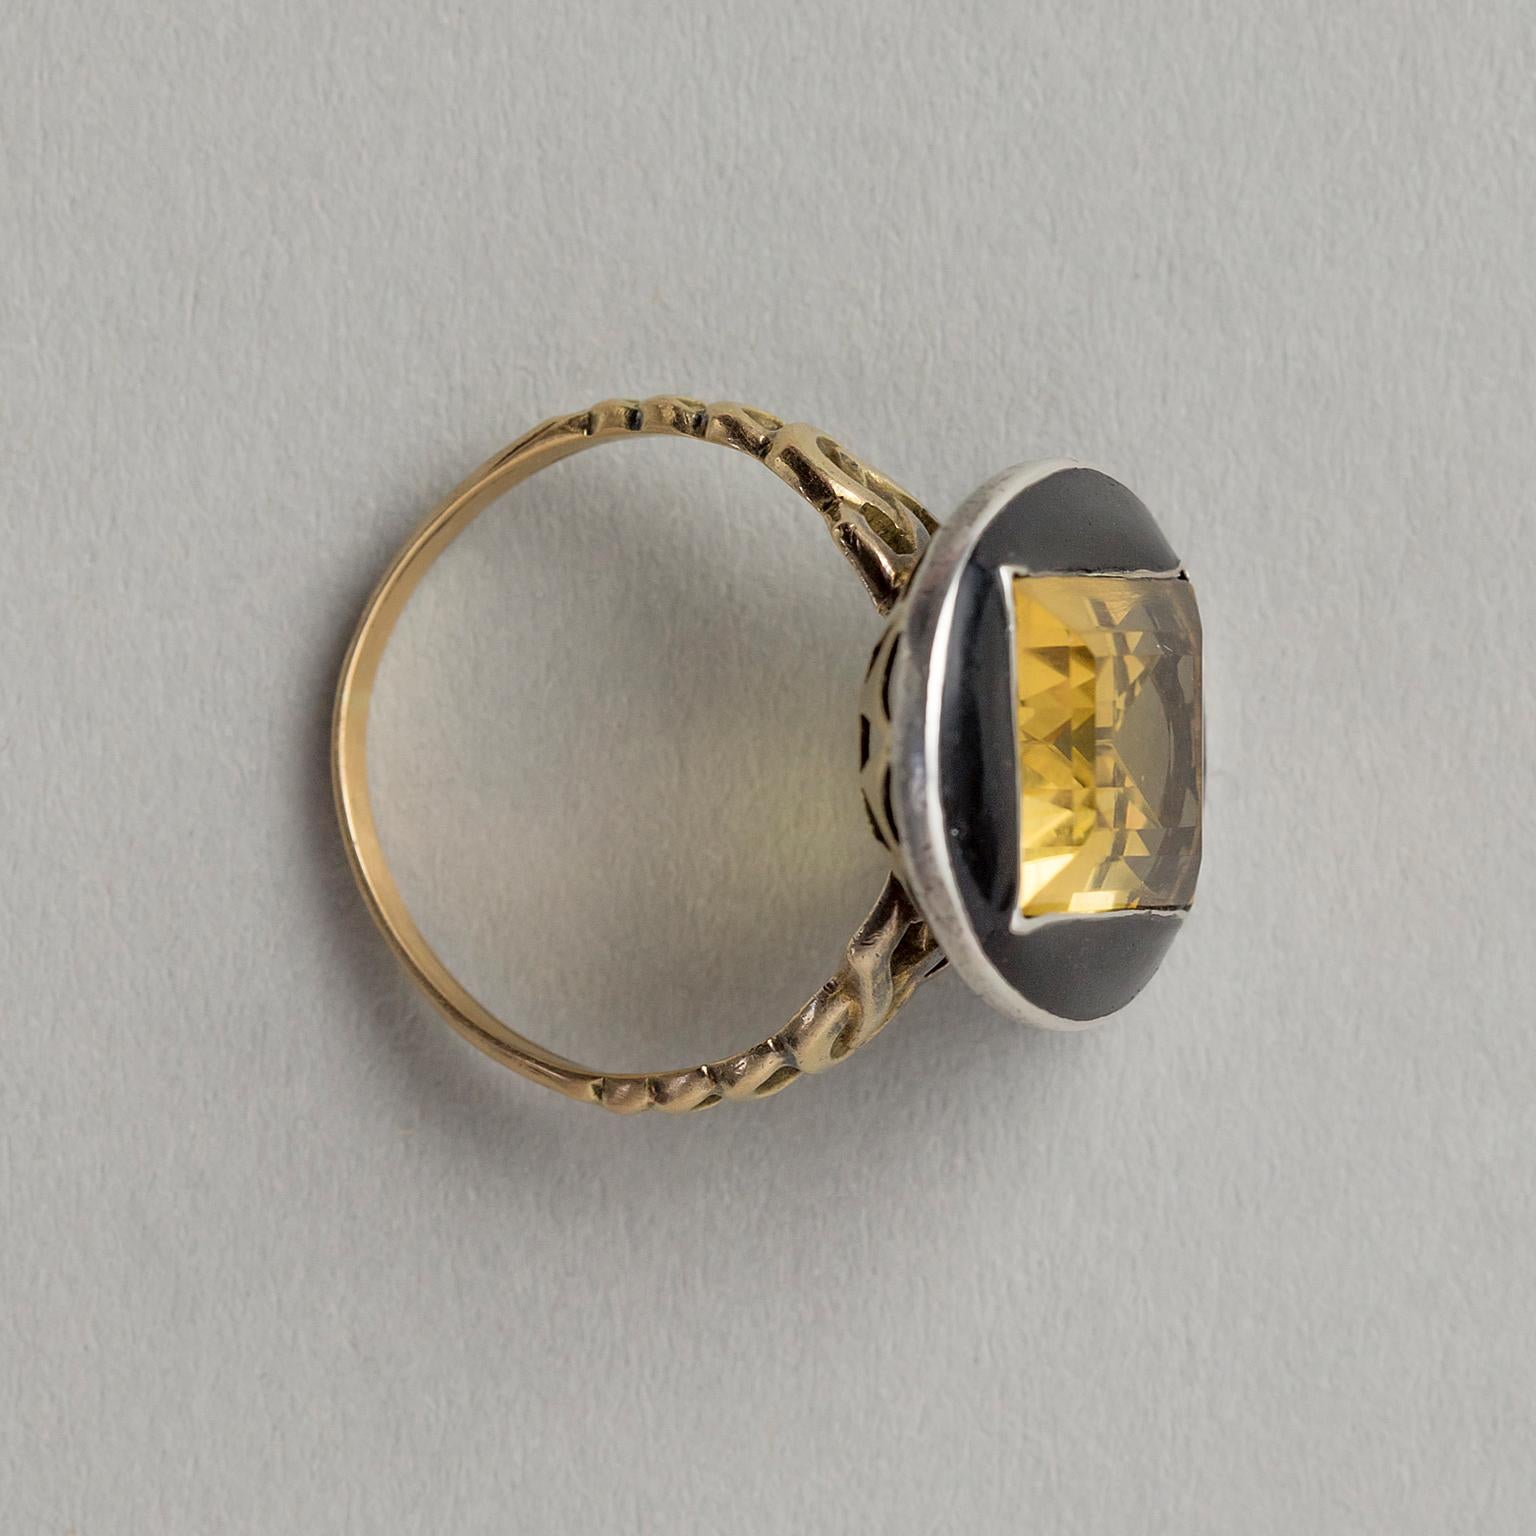 Baguette Cut 18K Gold and Silver Ring with Black Enamel and a Citrine